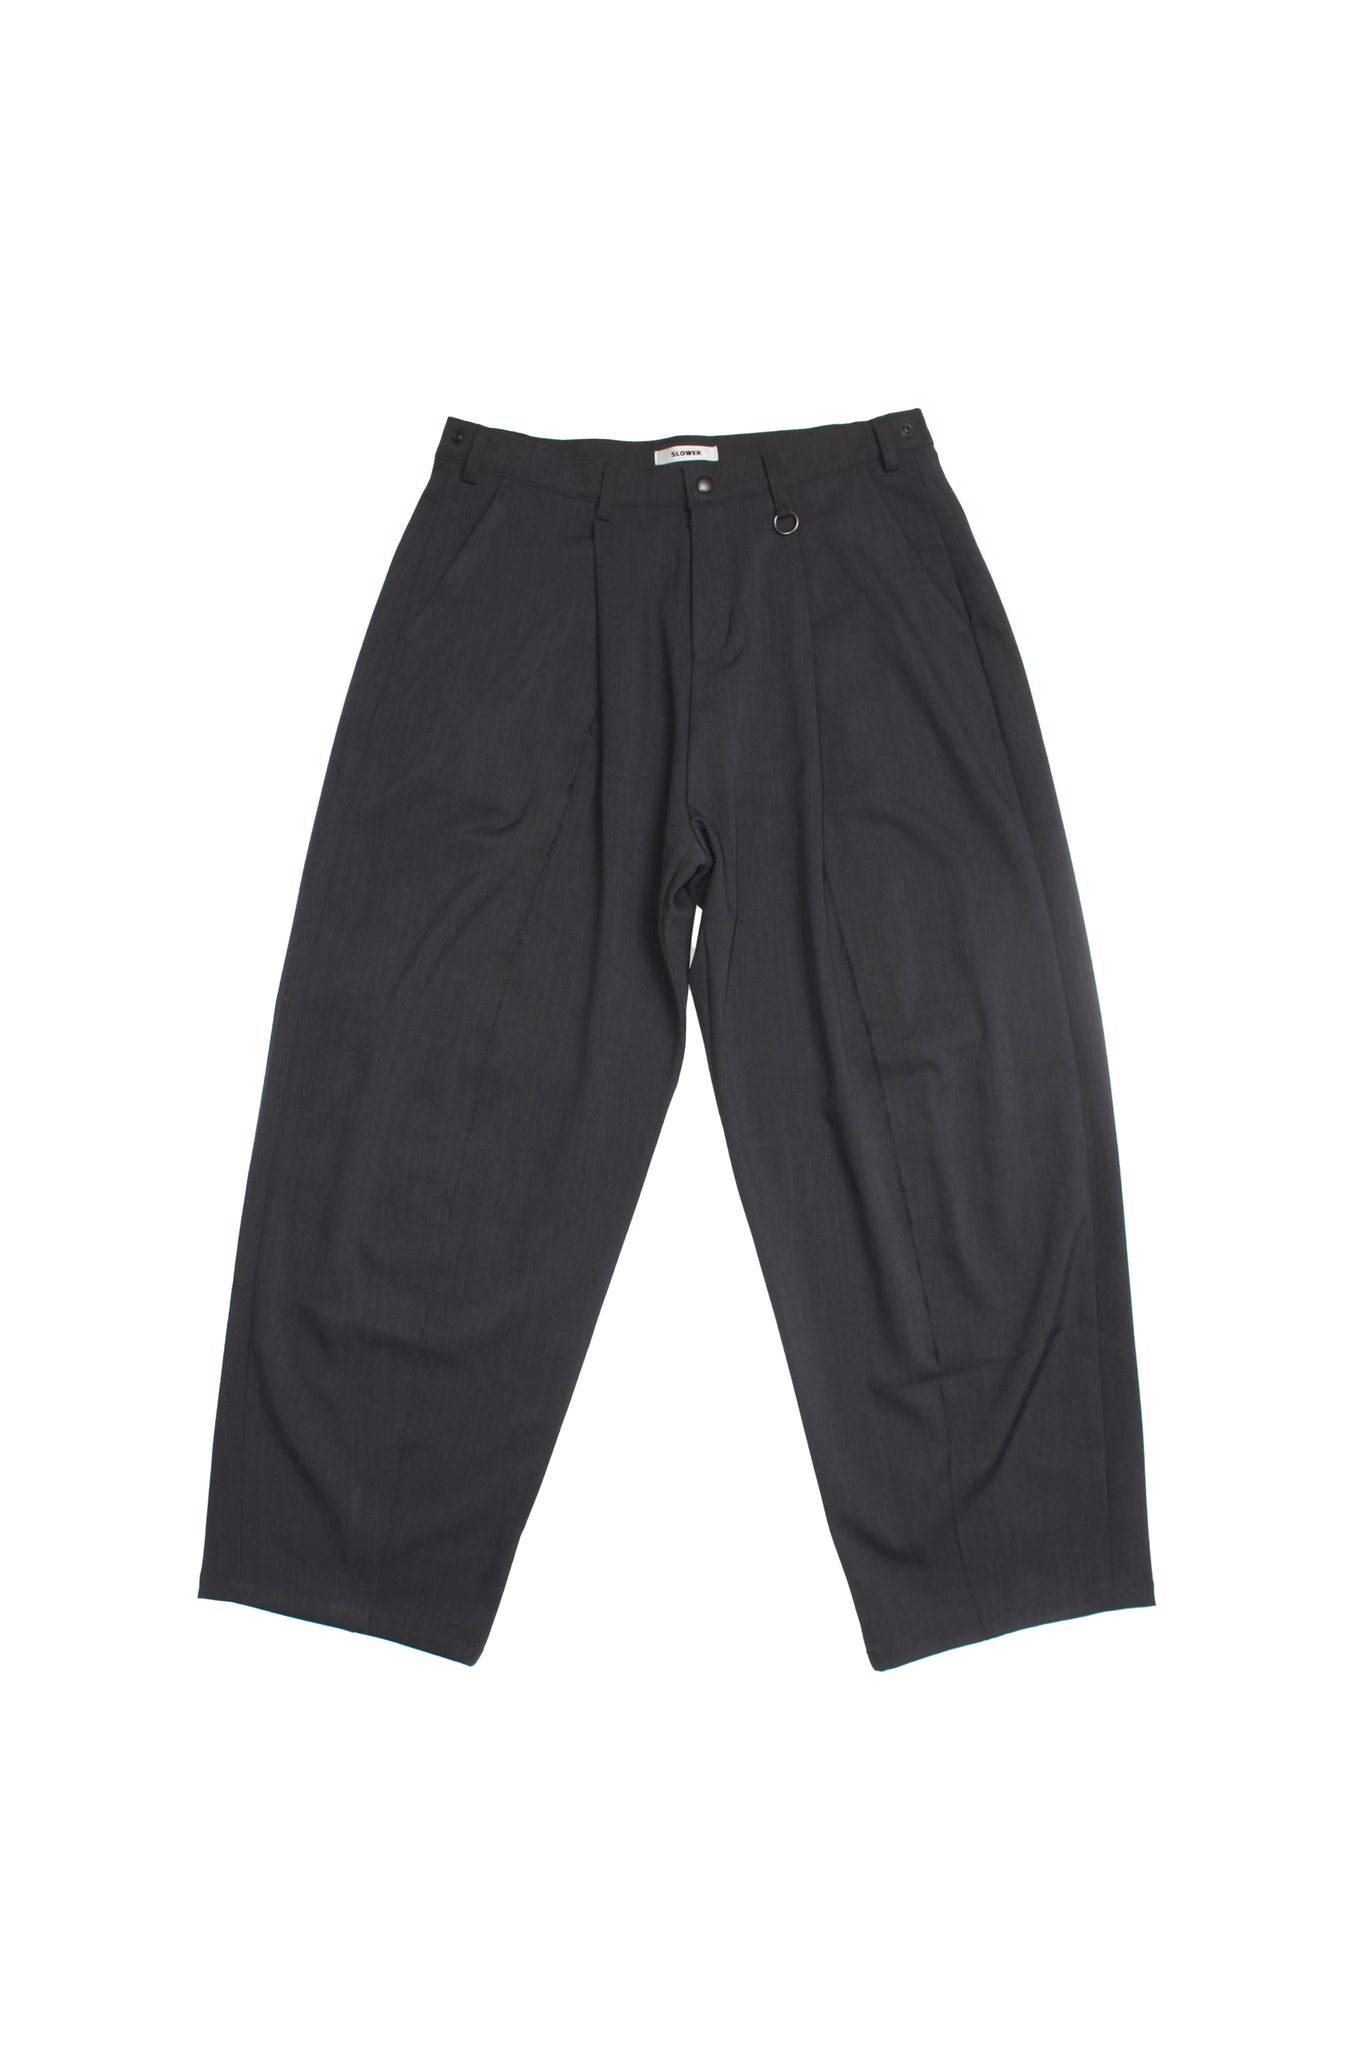 Cut off trousers in Charcoal